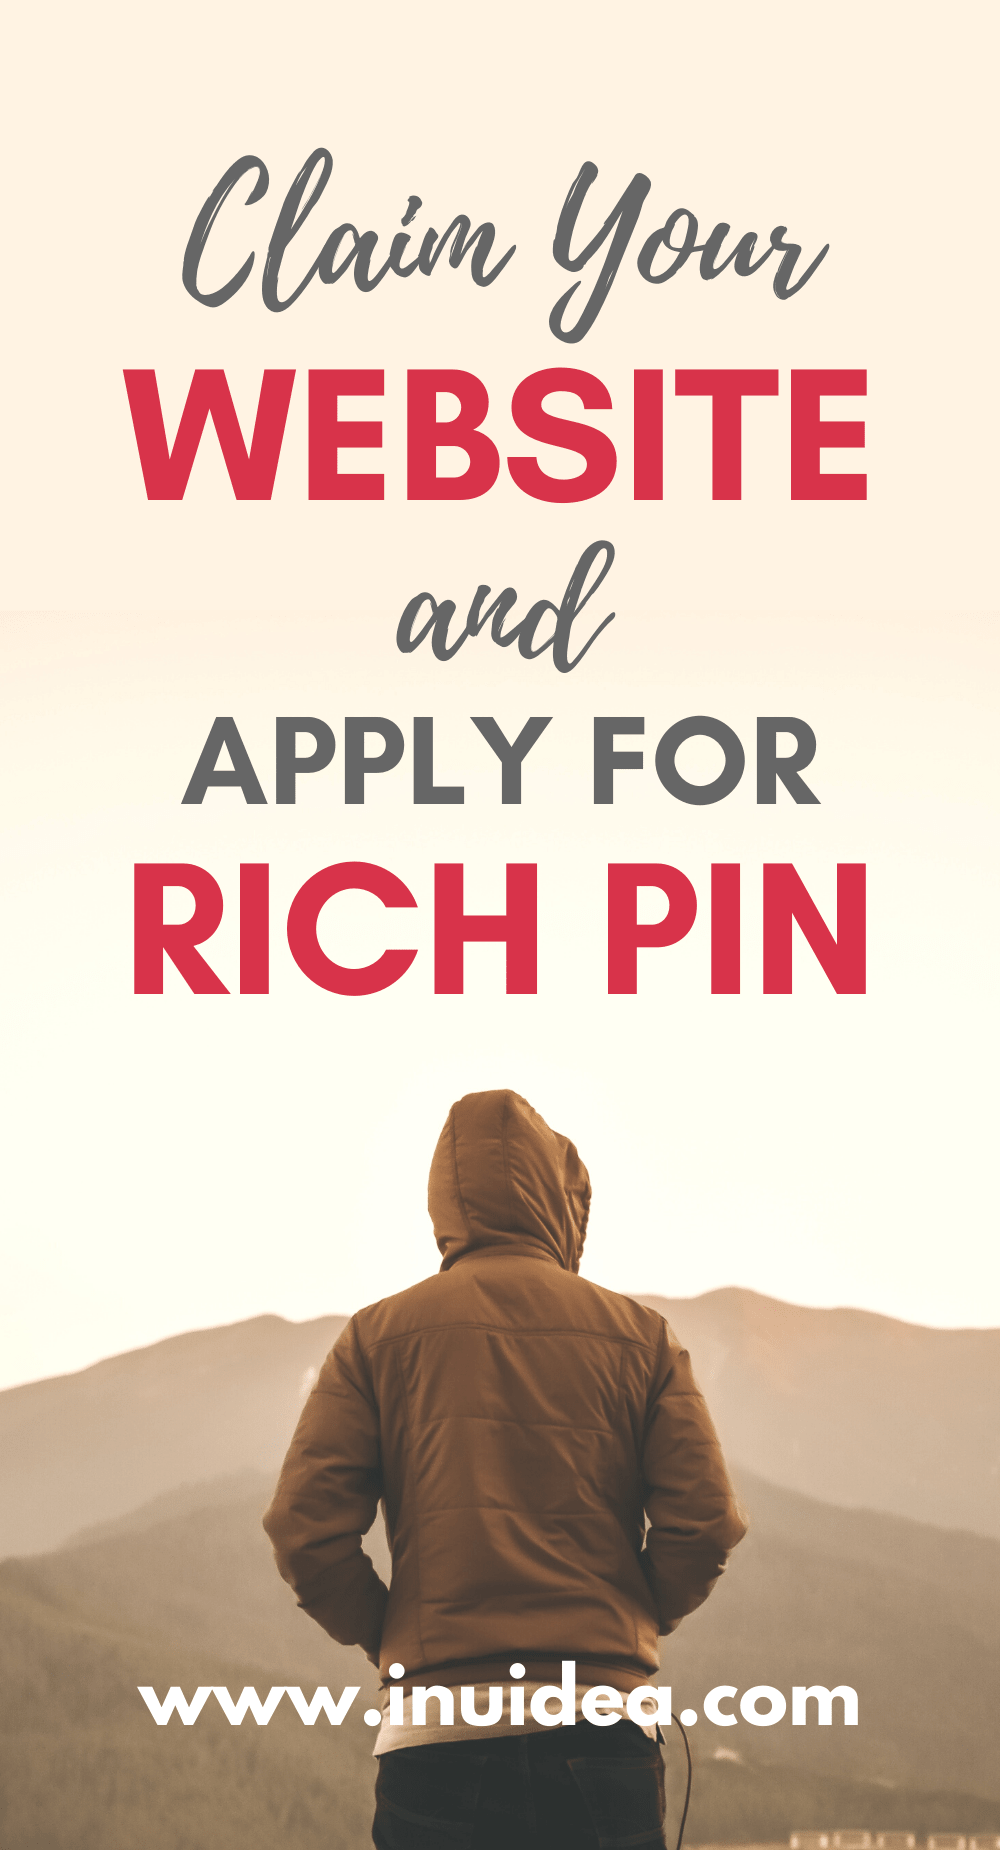 How to Claim Your Website and Apply for Rich Pin on Pinterest